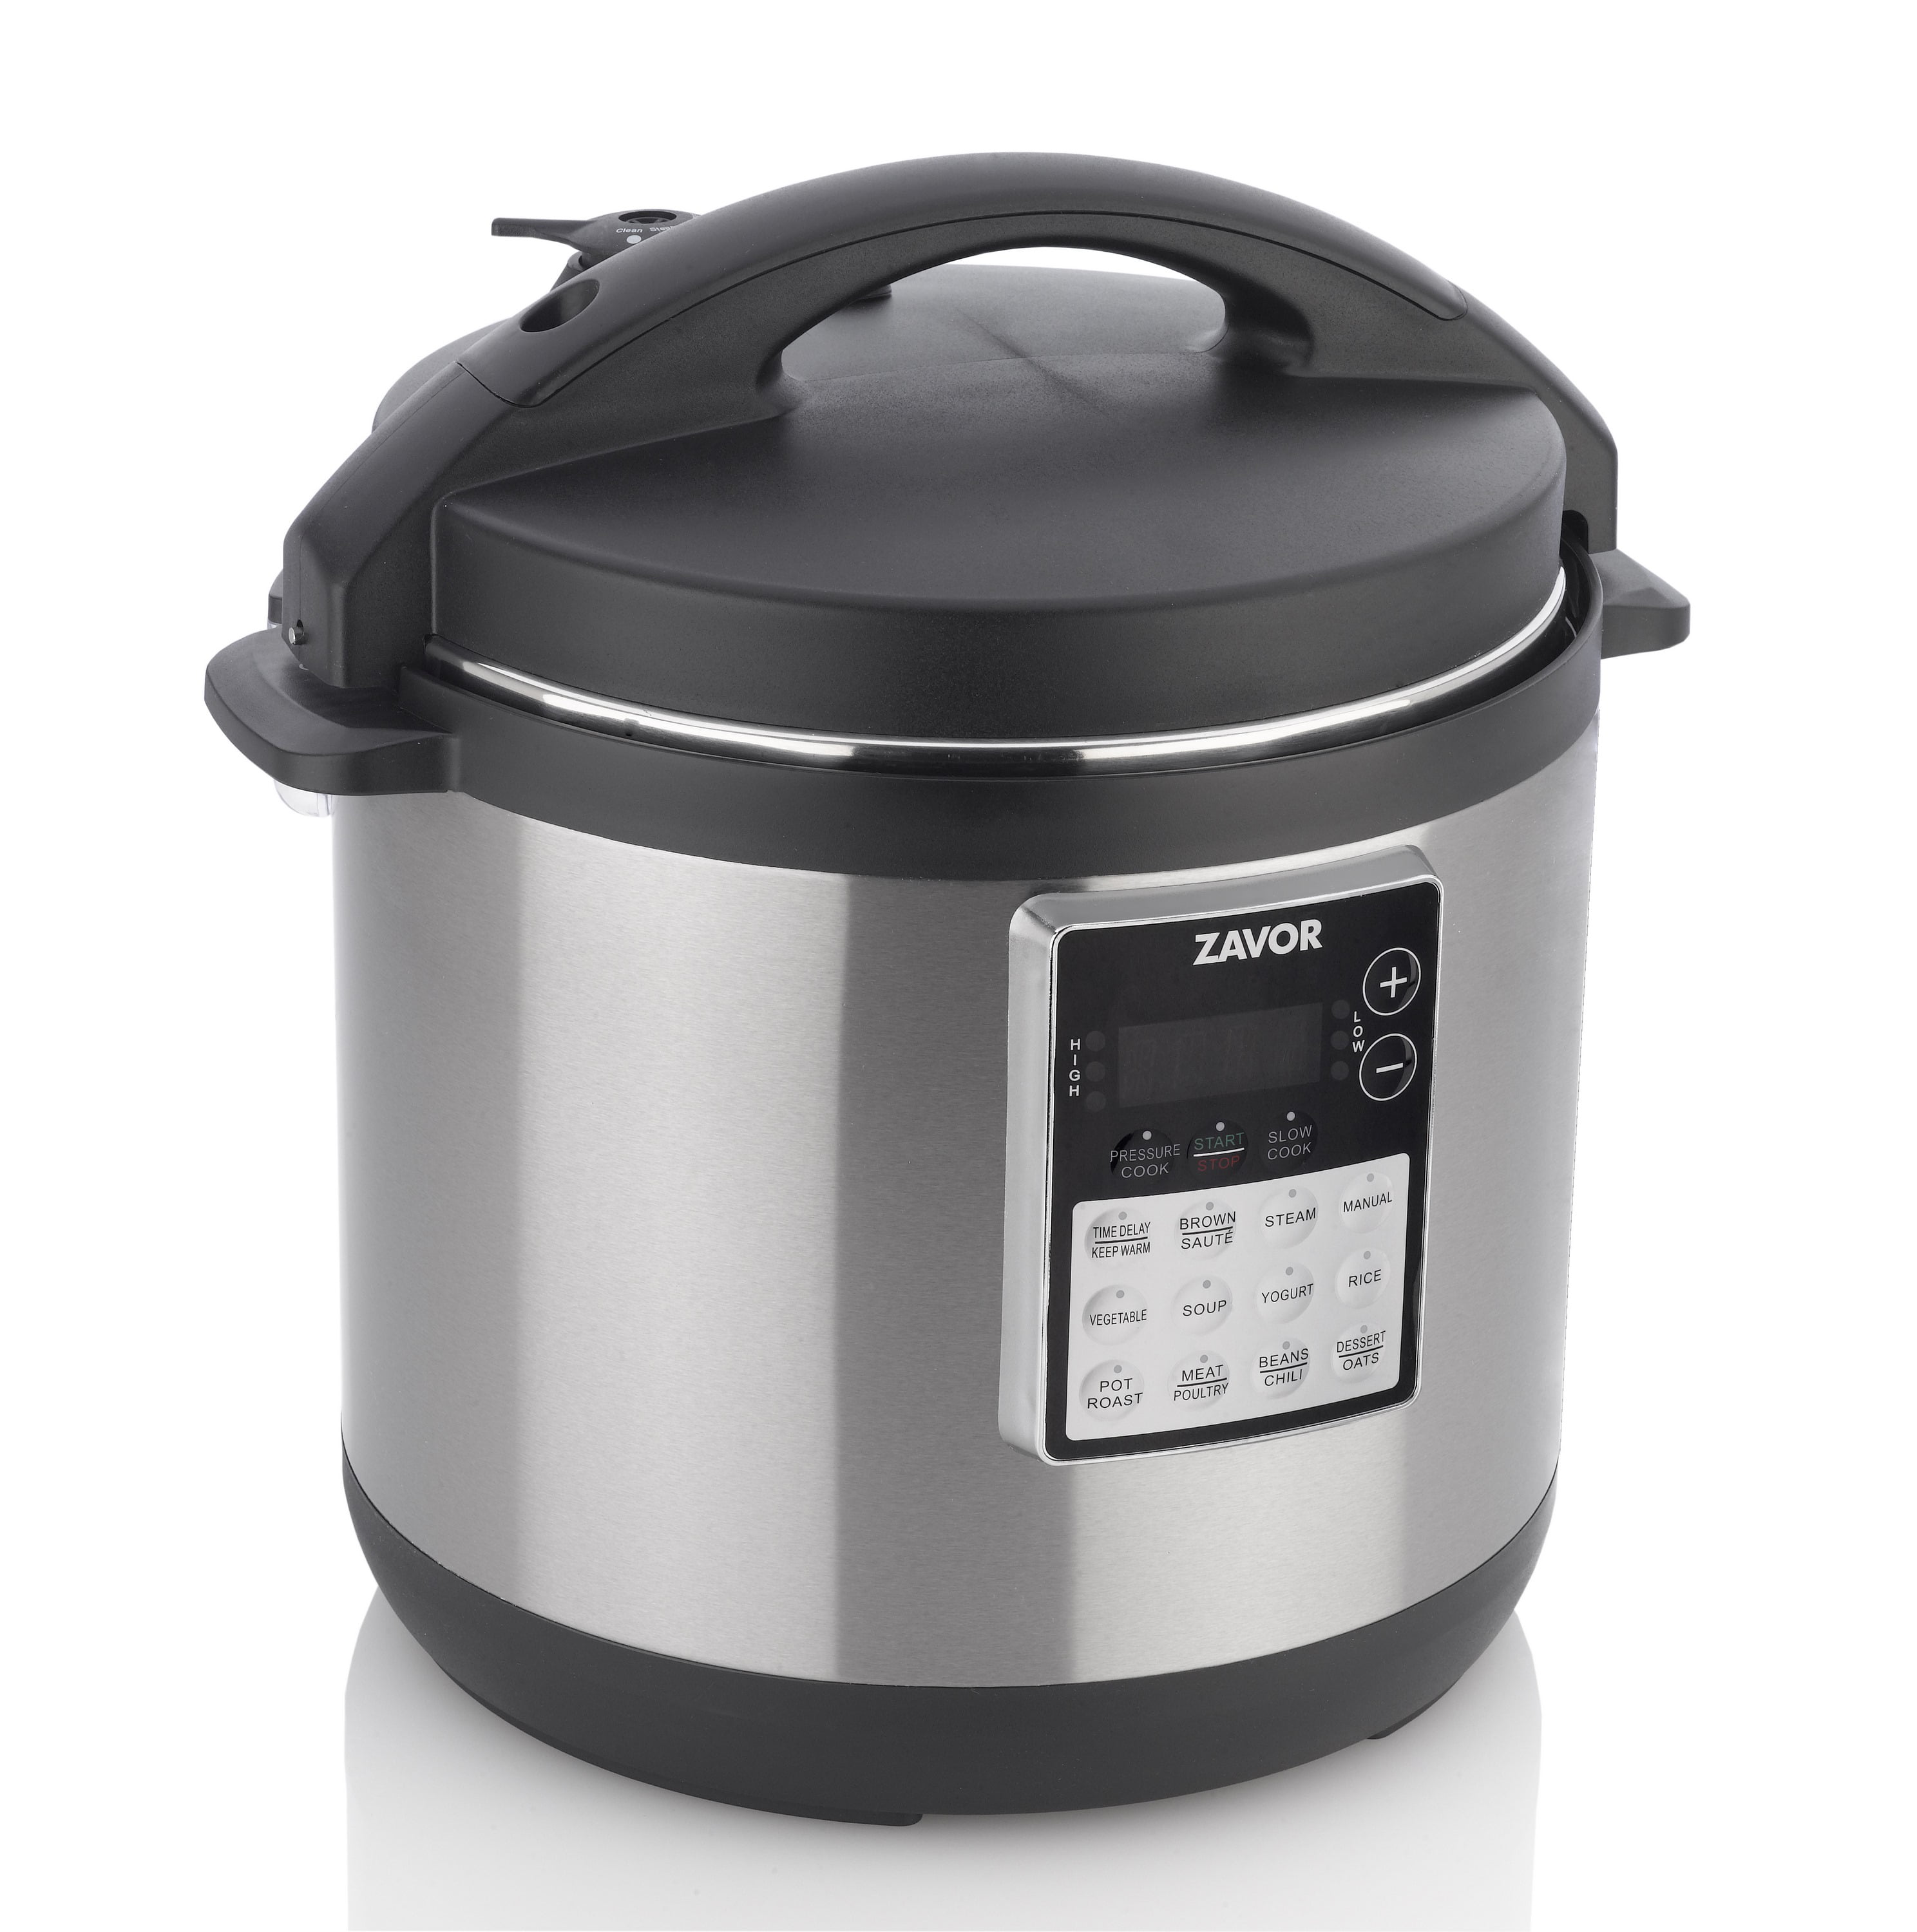 Zavor LUX Edge Multicooker, Electric Pressure Cooker, Rice and Slow Cooker